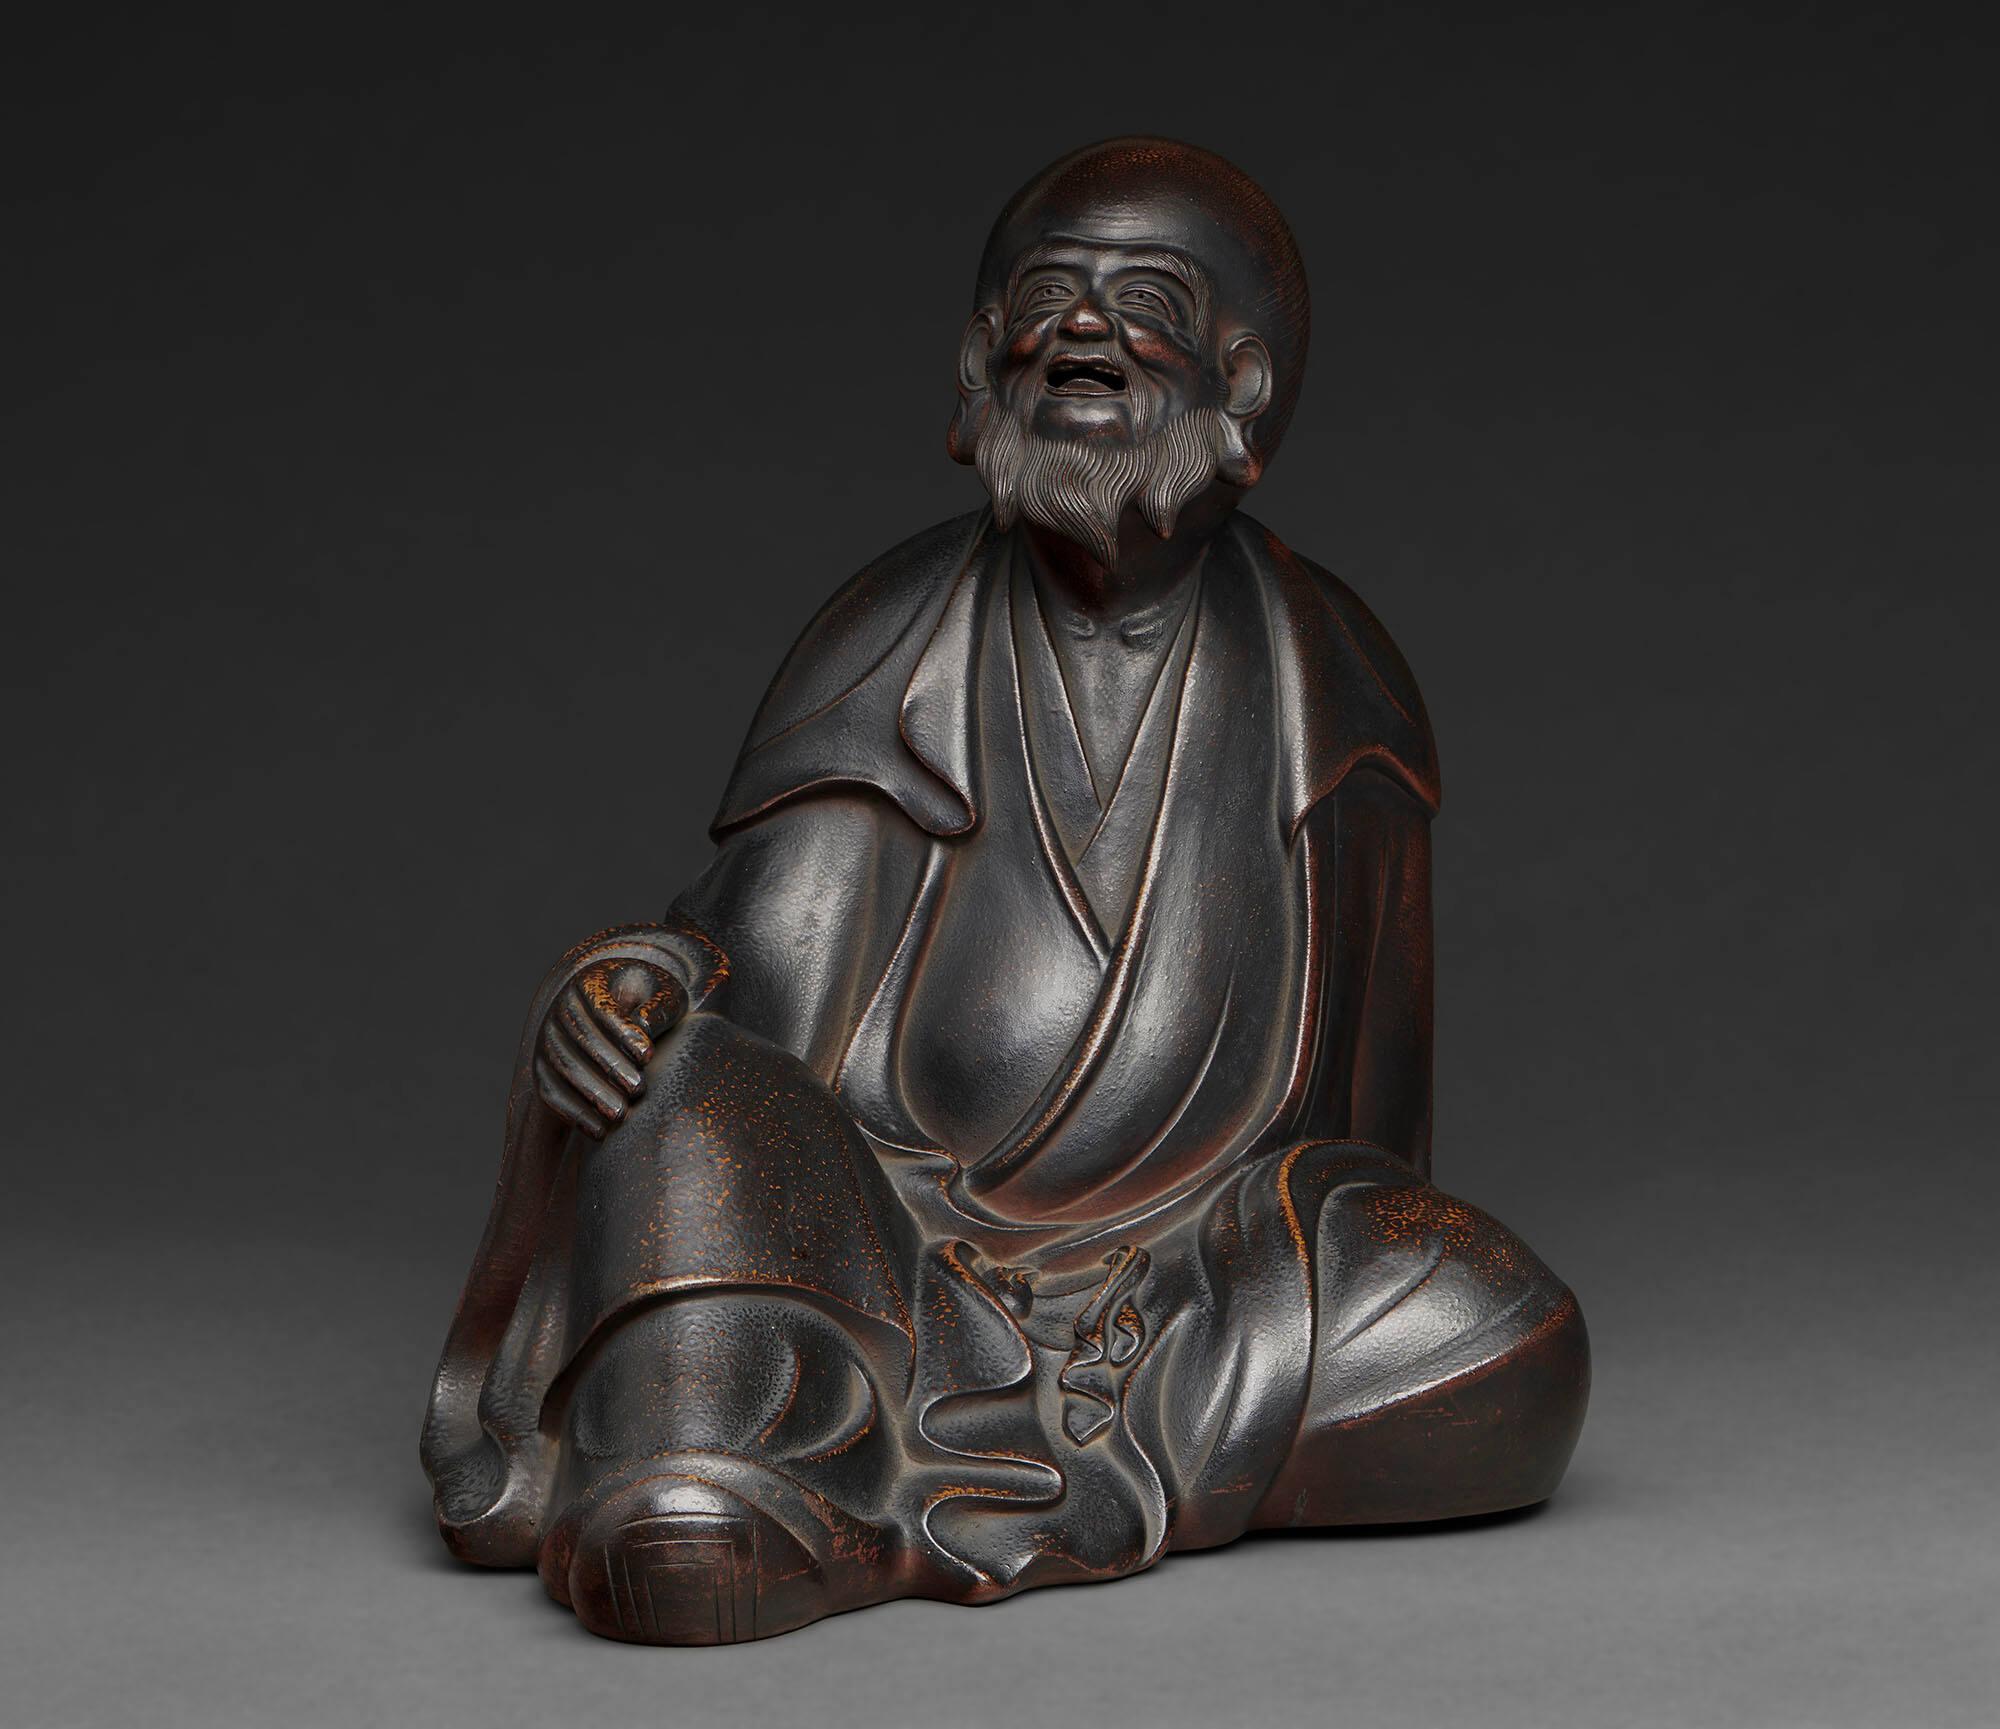 A dark brown to black ceramic figure of a seated man, Chinese poet Li Po. The robed man has a beard and hair pulled into a bun at the back of his head. One hand rests on his knee and the other behind him.